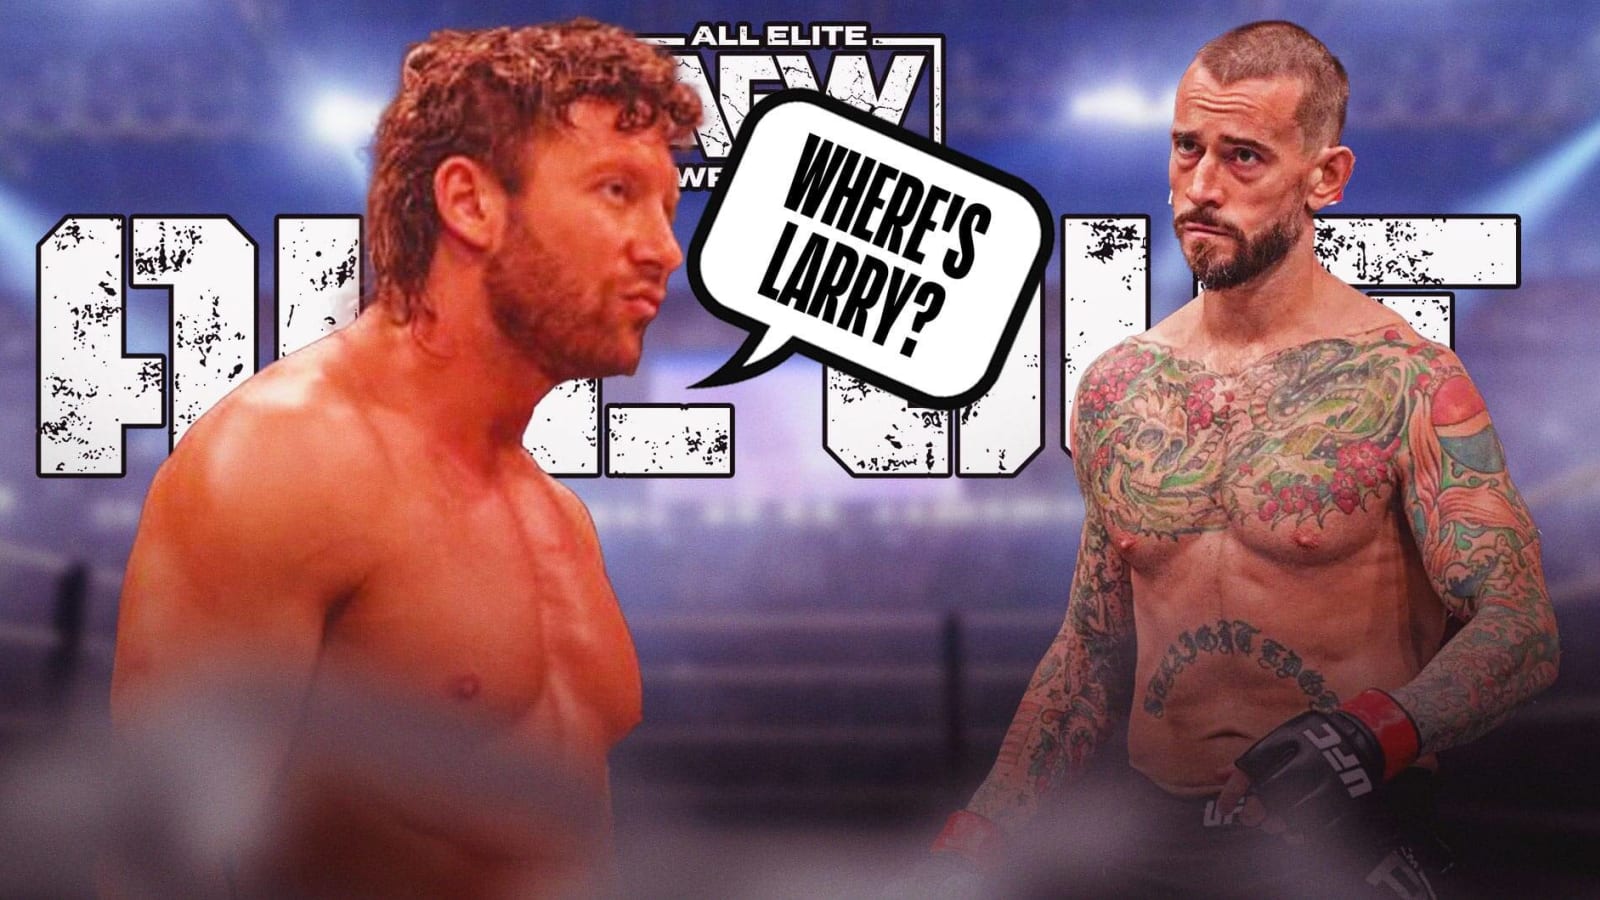 Kenny Omega reveals his role in the Brawl Out with CM Punk at AEW All Out 2022